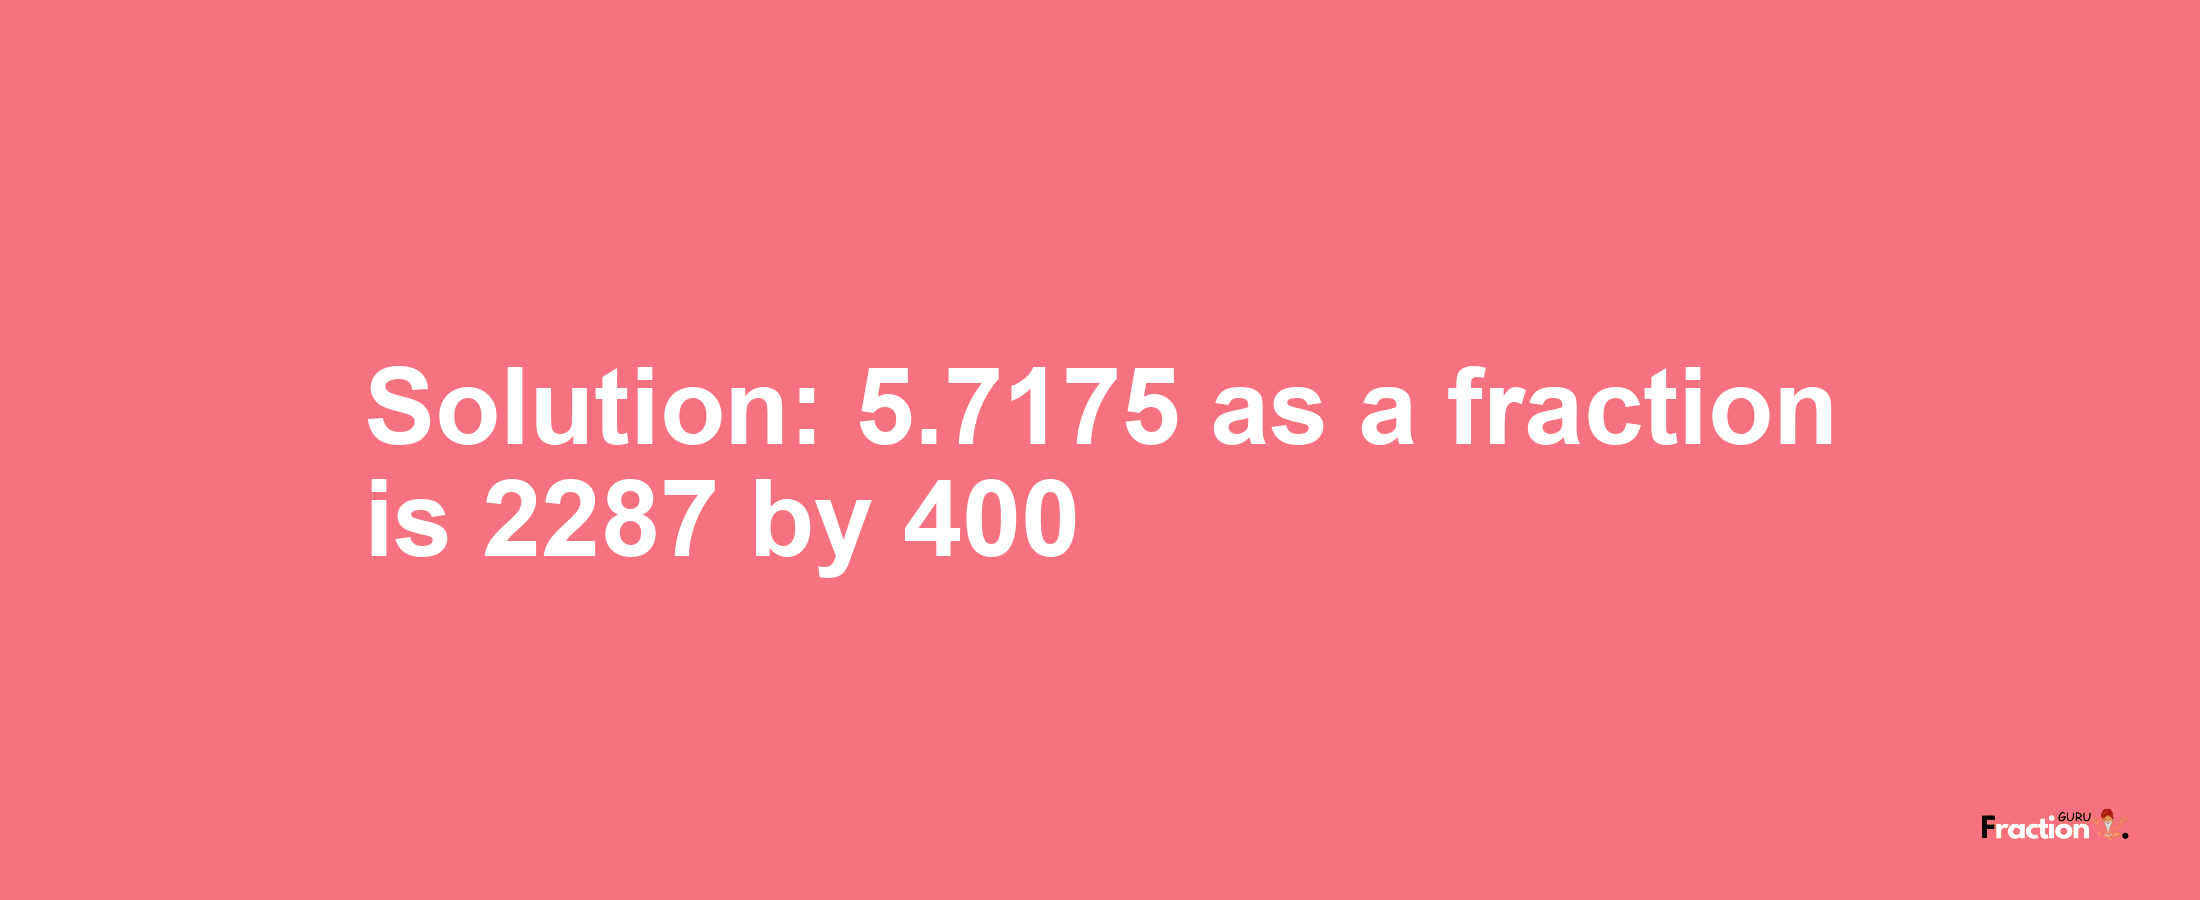 Solution:5.7175 as a fraction is 2287/400